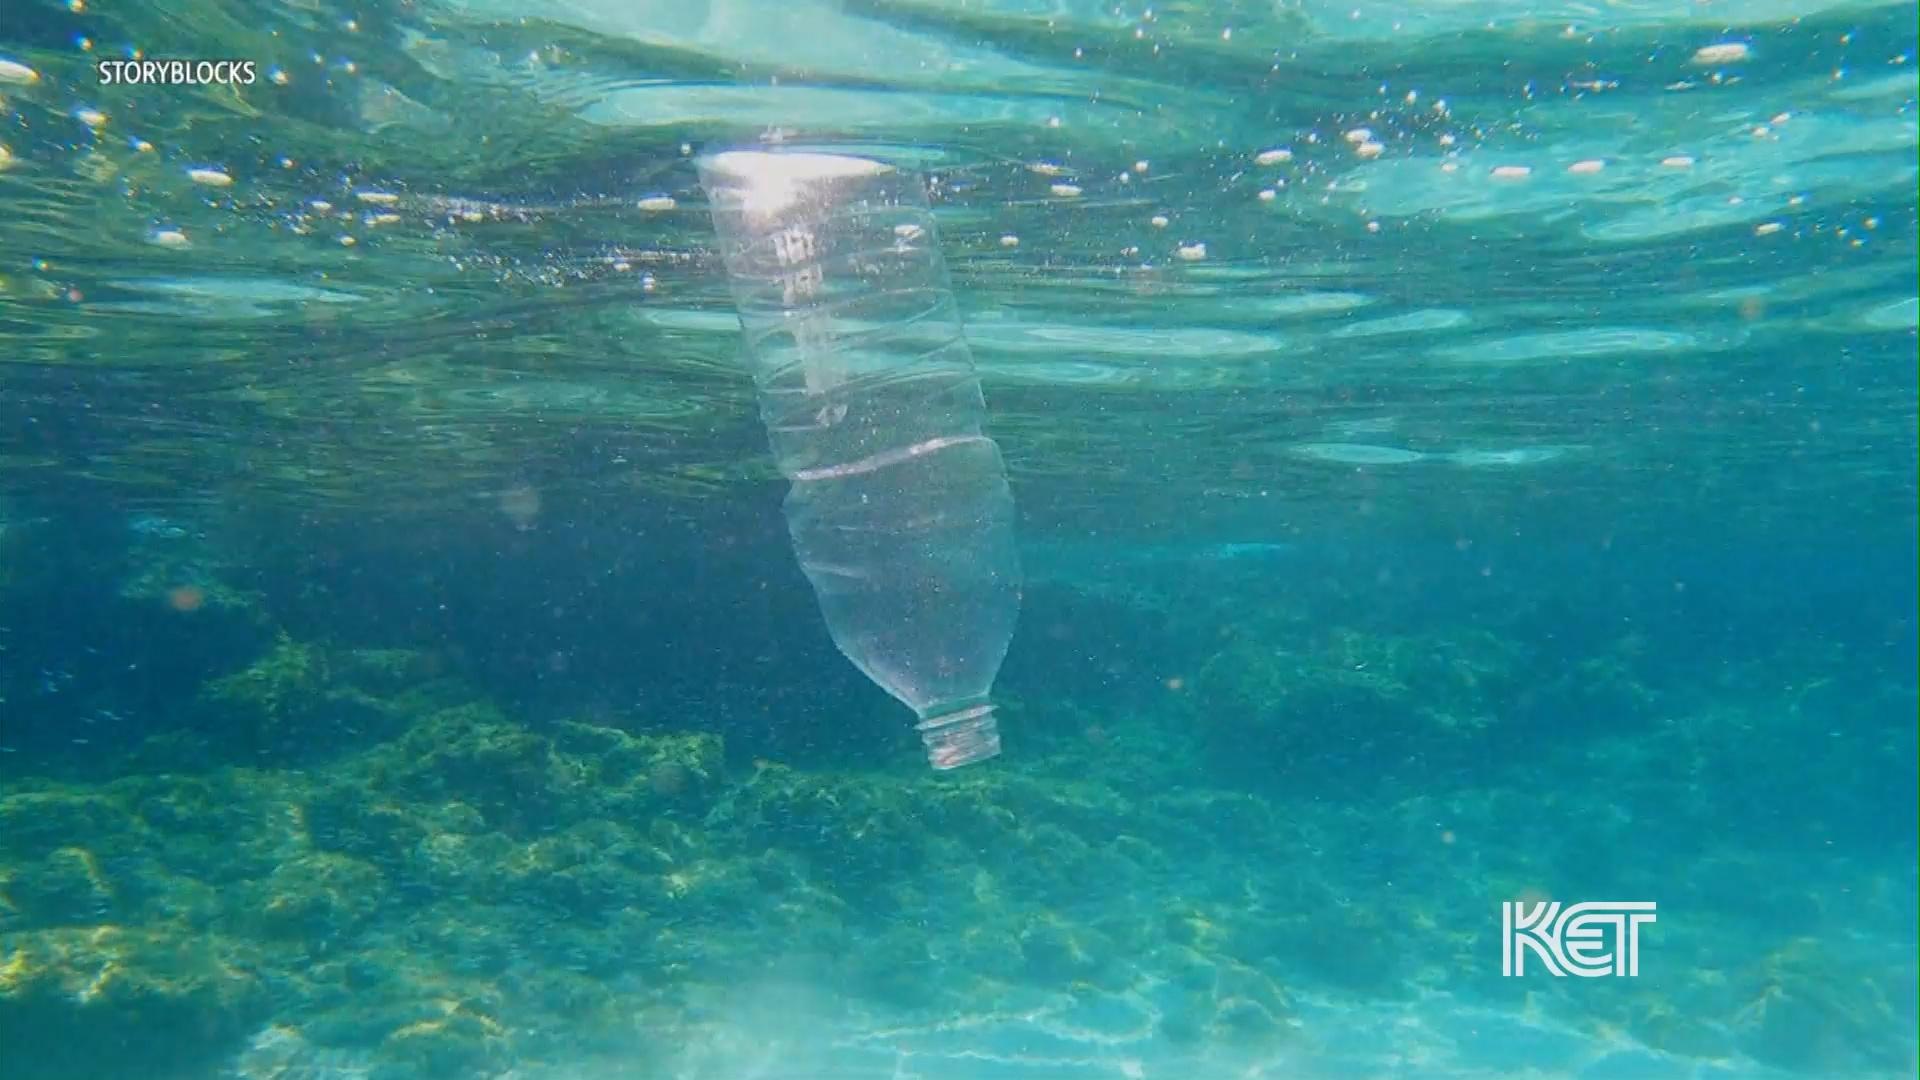 University of Kentucky Researchers’ Possible Solution to Plastic Pollution